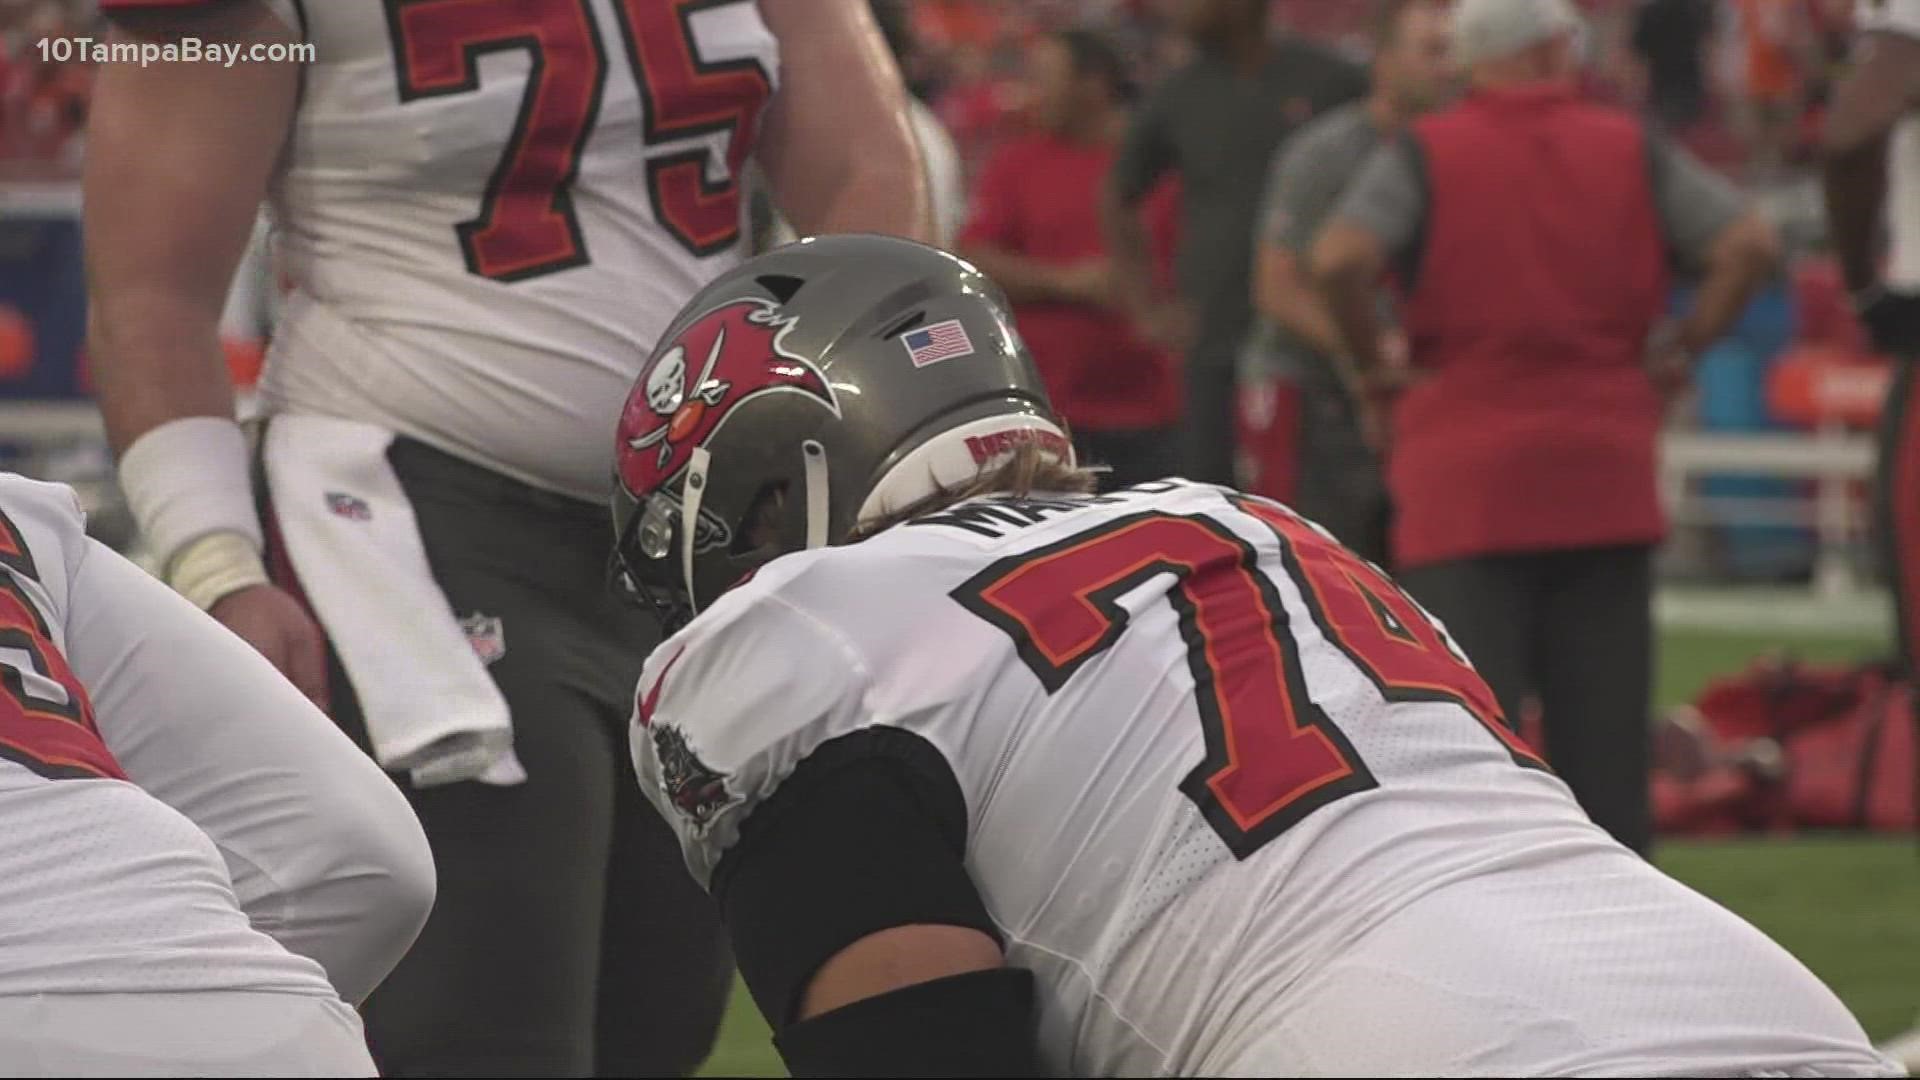 The Buccaneers offensive lineman is calling it a career at 28 years old.